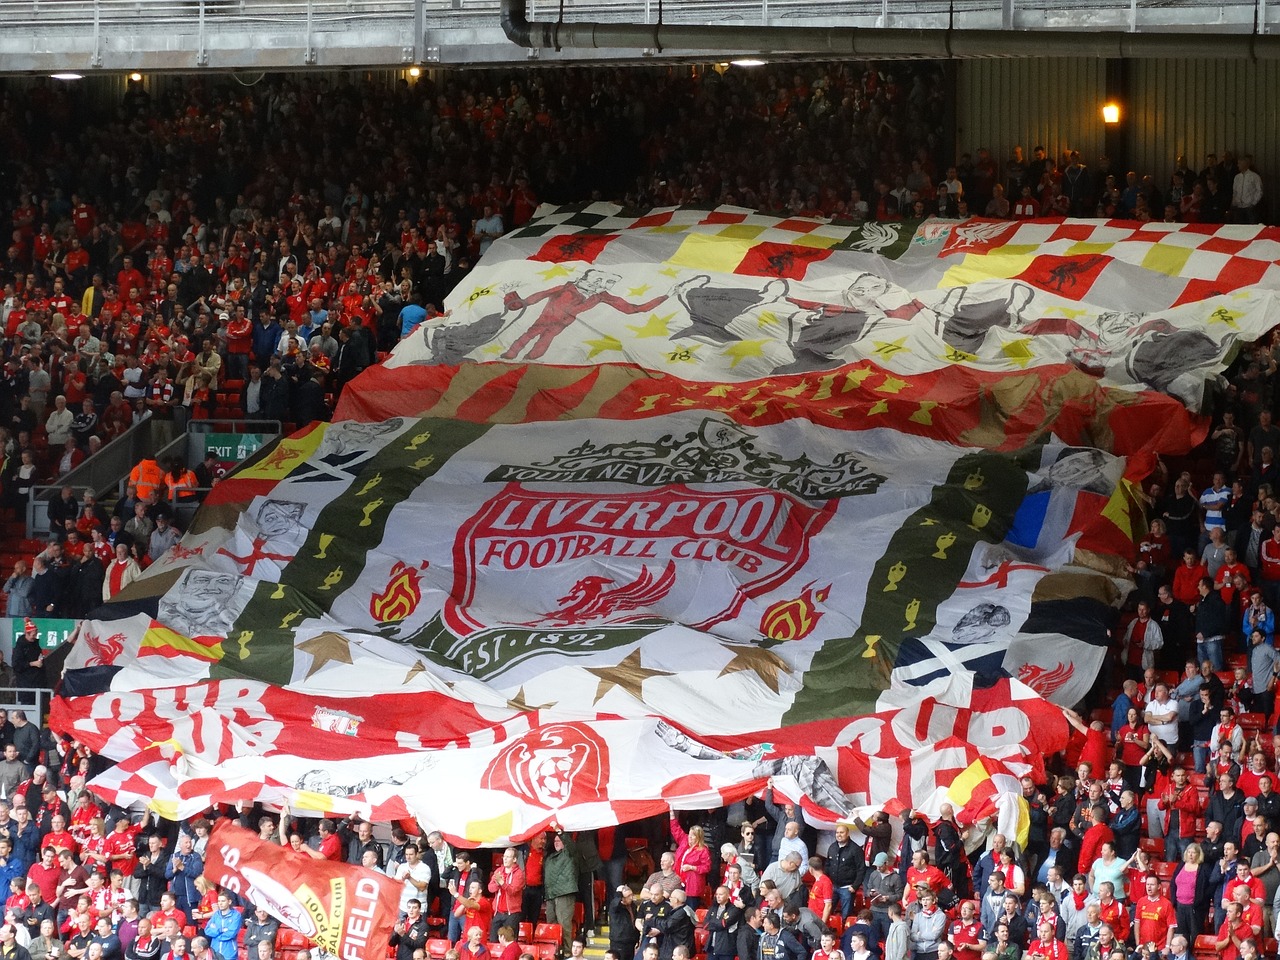 Anfield: The Home of Liverpool FC and the Passionate Kop